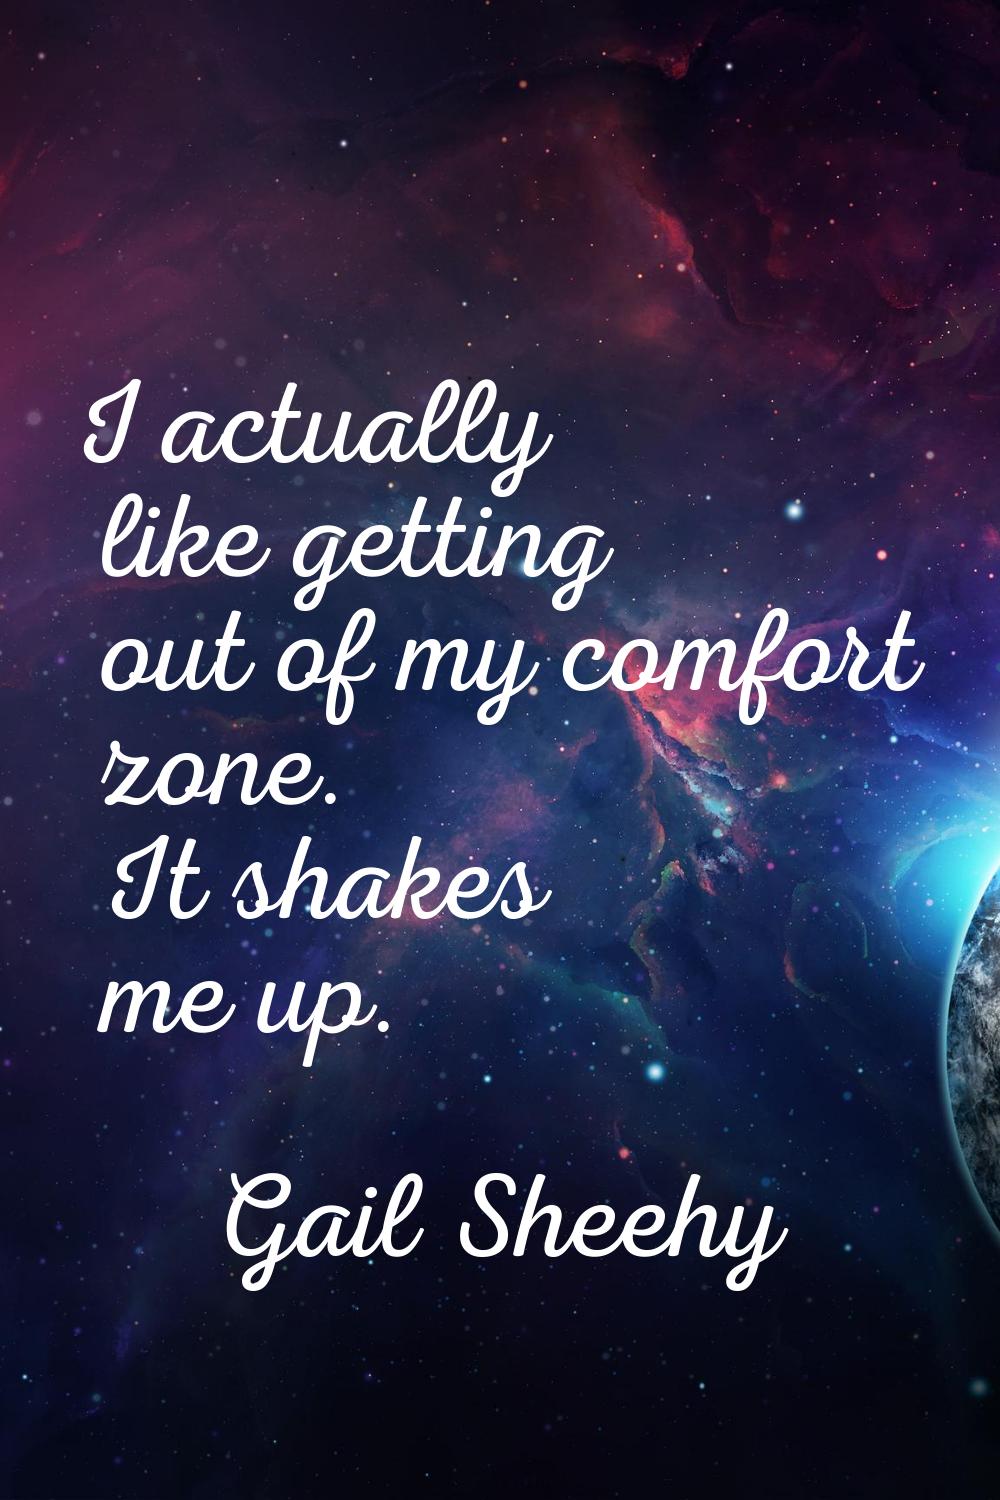 I actually like getting out of my comfort zone. It shakes me up.